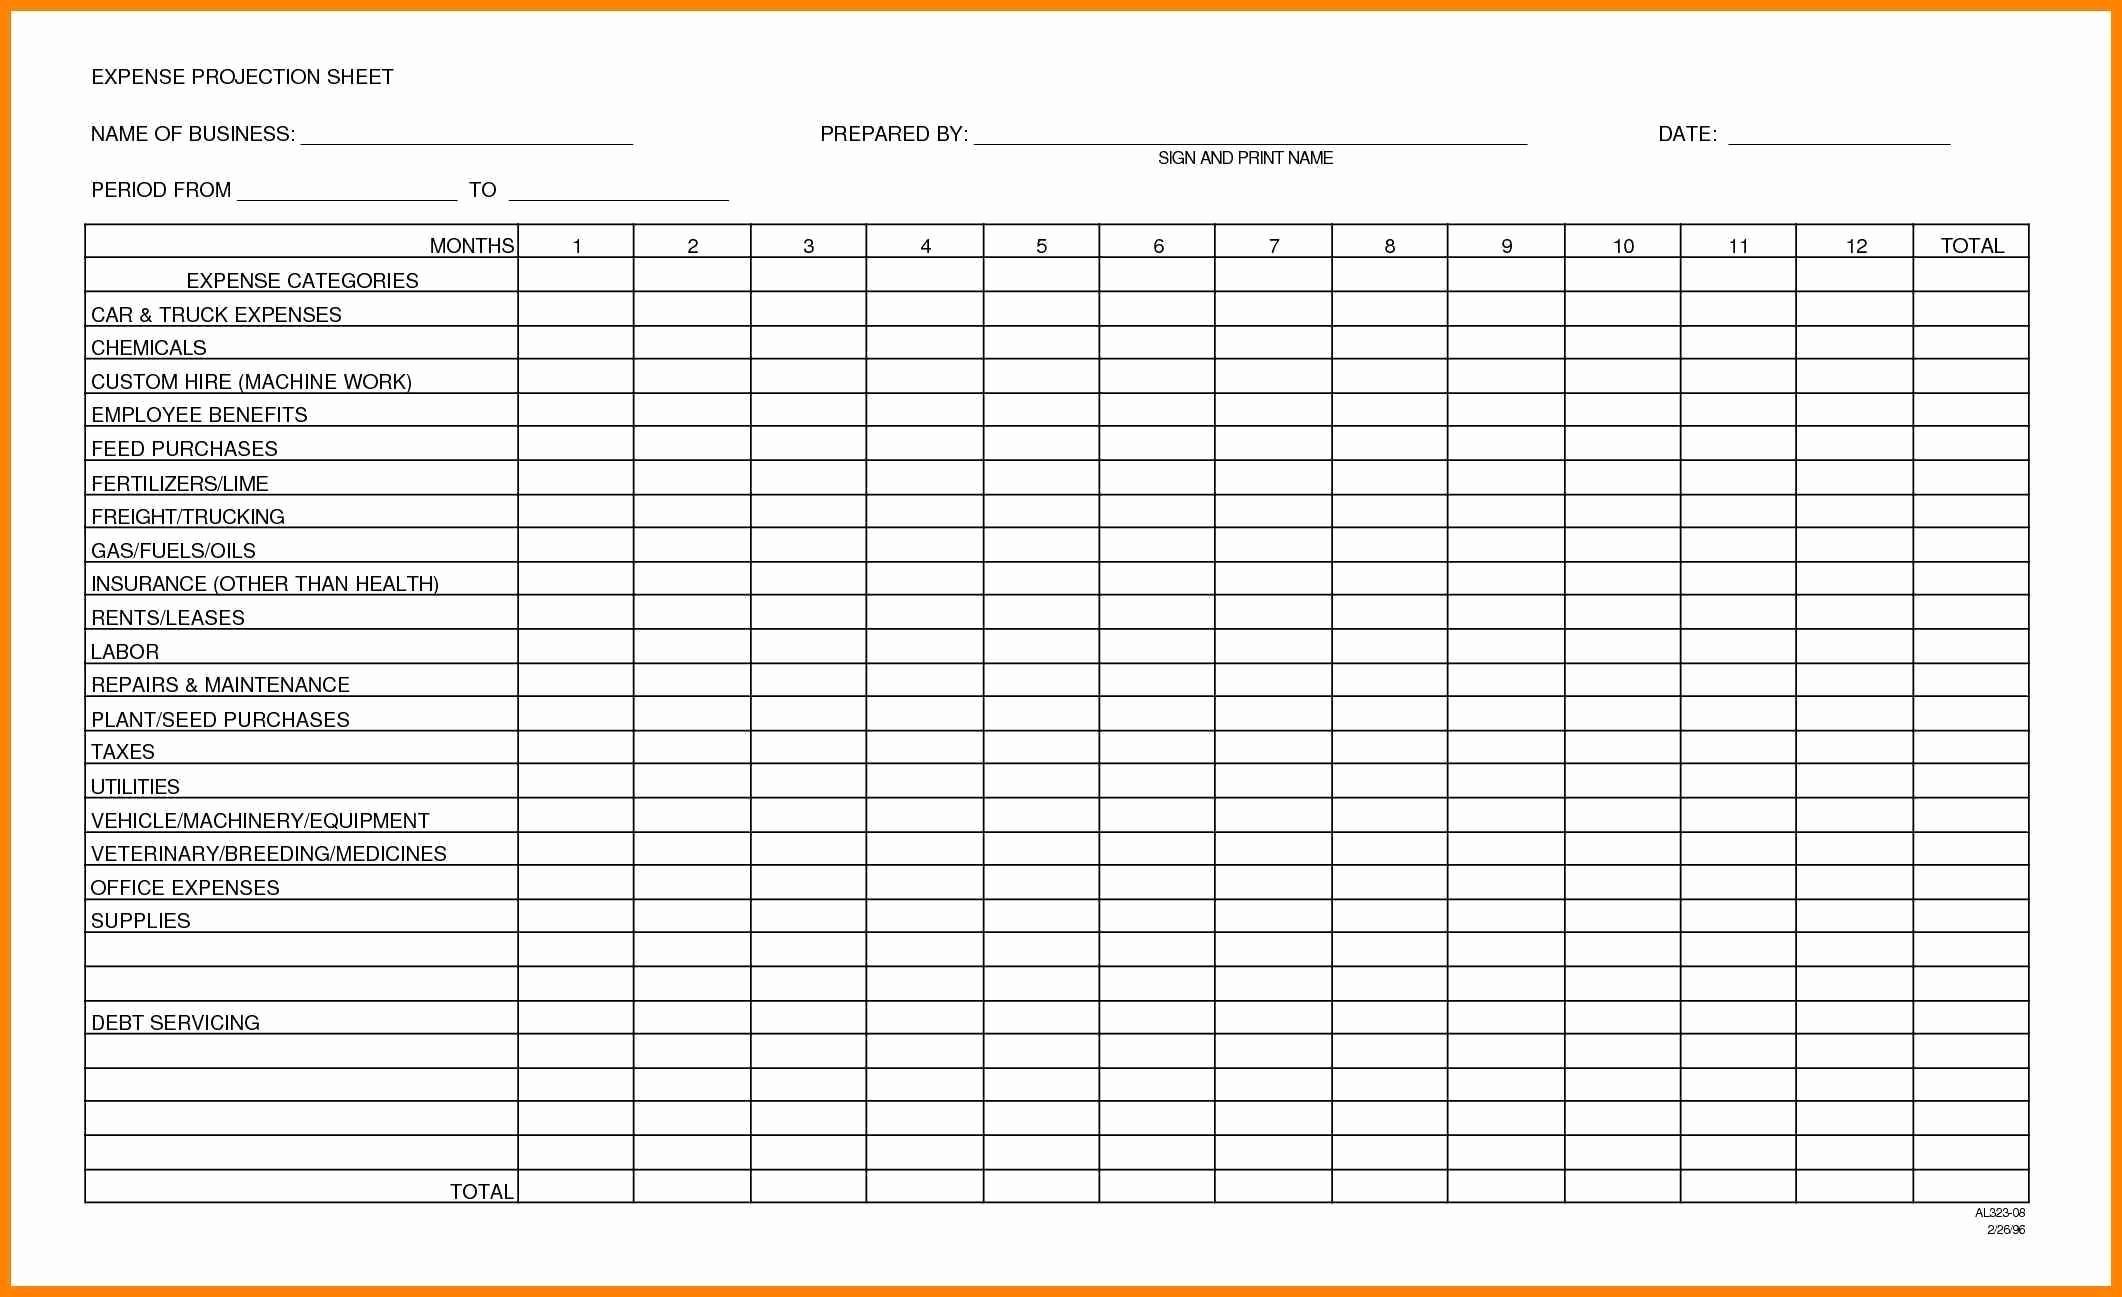 Tax Expense Sheet Tier Crewpulse Co Document Business Spreadsheet For